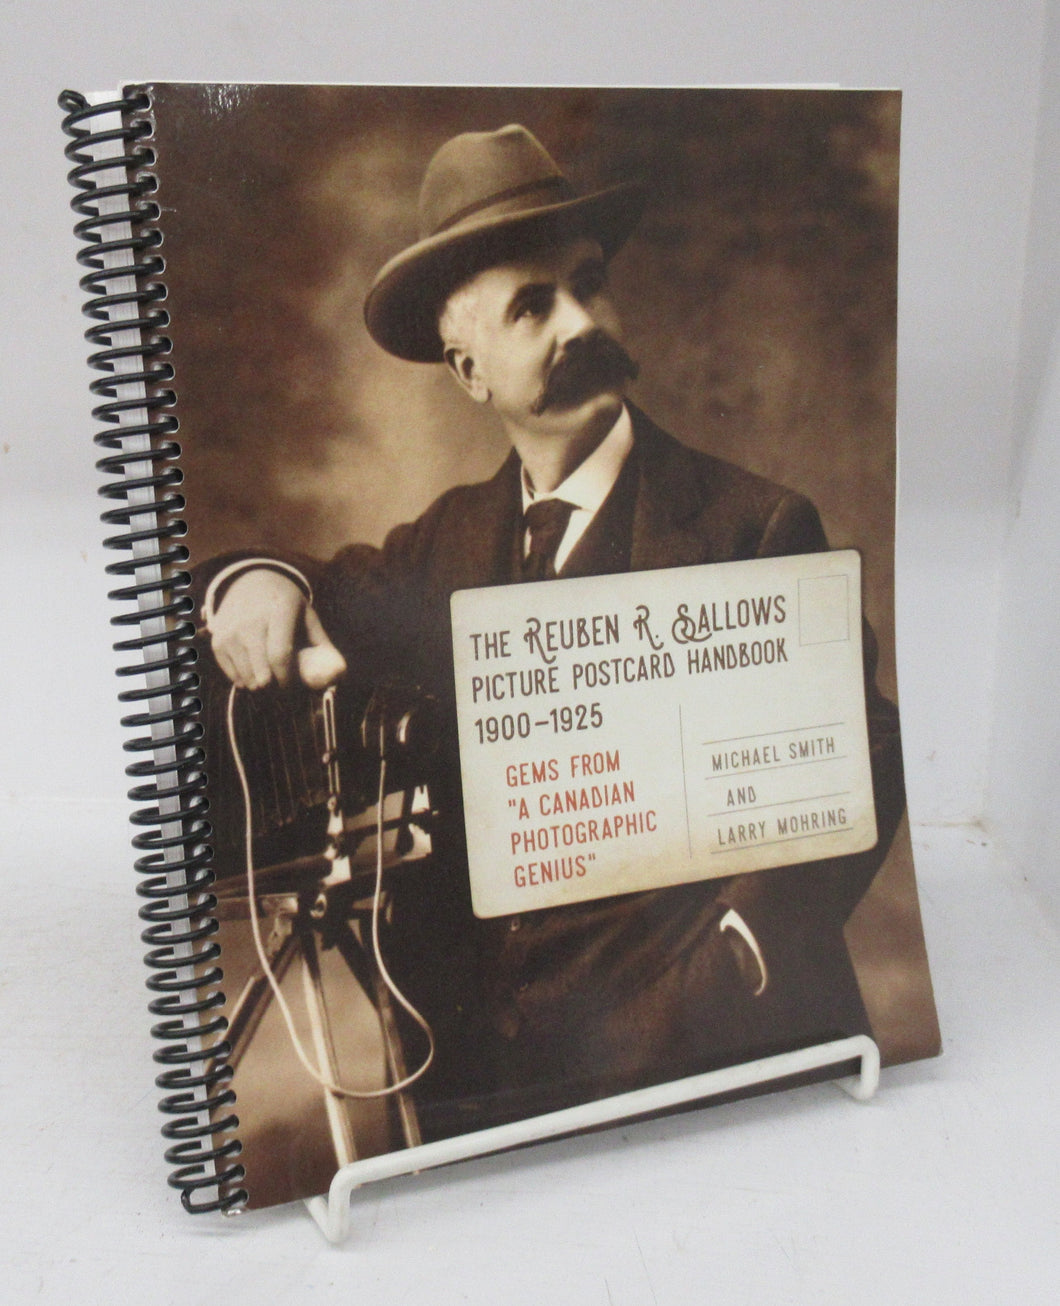 The Reuben R. Sallows Picture Postcard Handbook 1900-1925. Gems from  "A Canadian Photographic Genius"